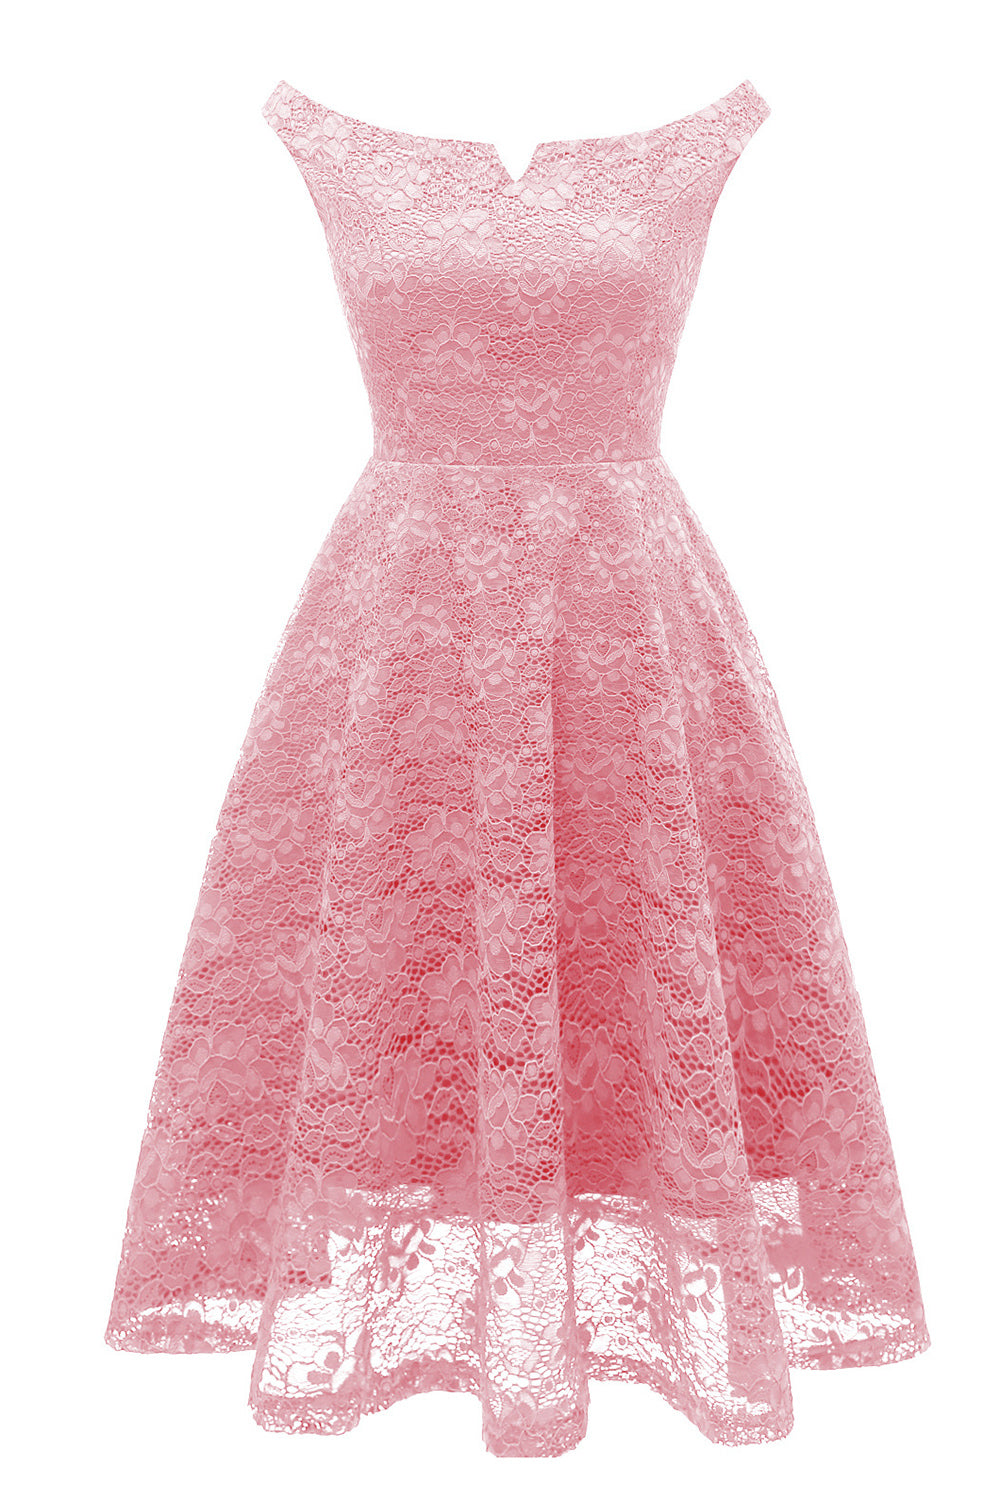 Pink A Line Lace Dress with Sleeveless